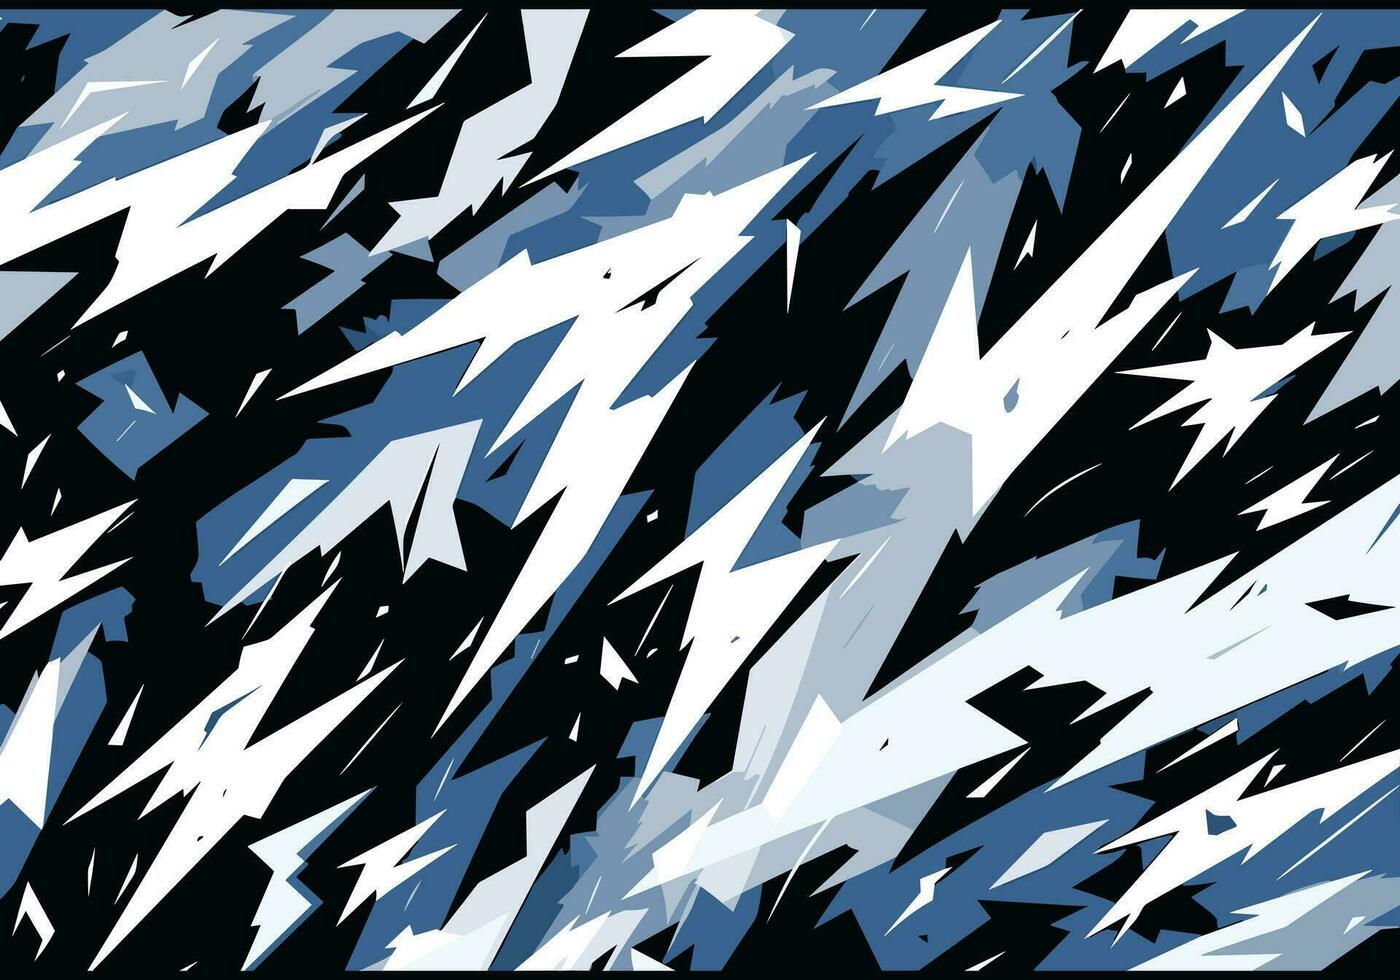 abstract black and white lightning vector with lightning bolts, in the style of pattern-based painting, graffiti-inspired geometric abstraction,dark white and dark navy, jagged edges